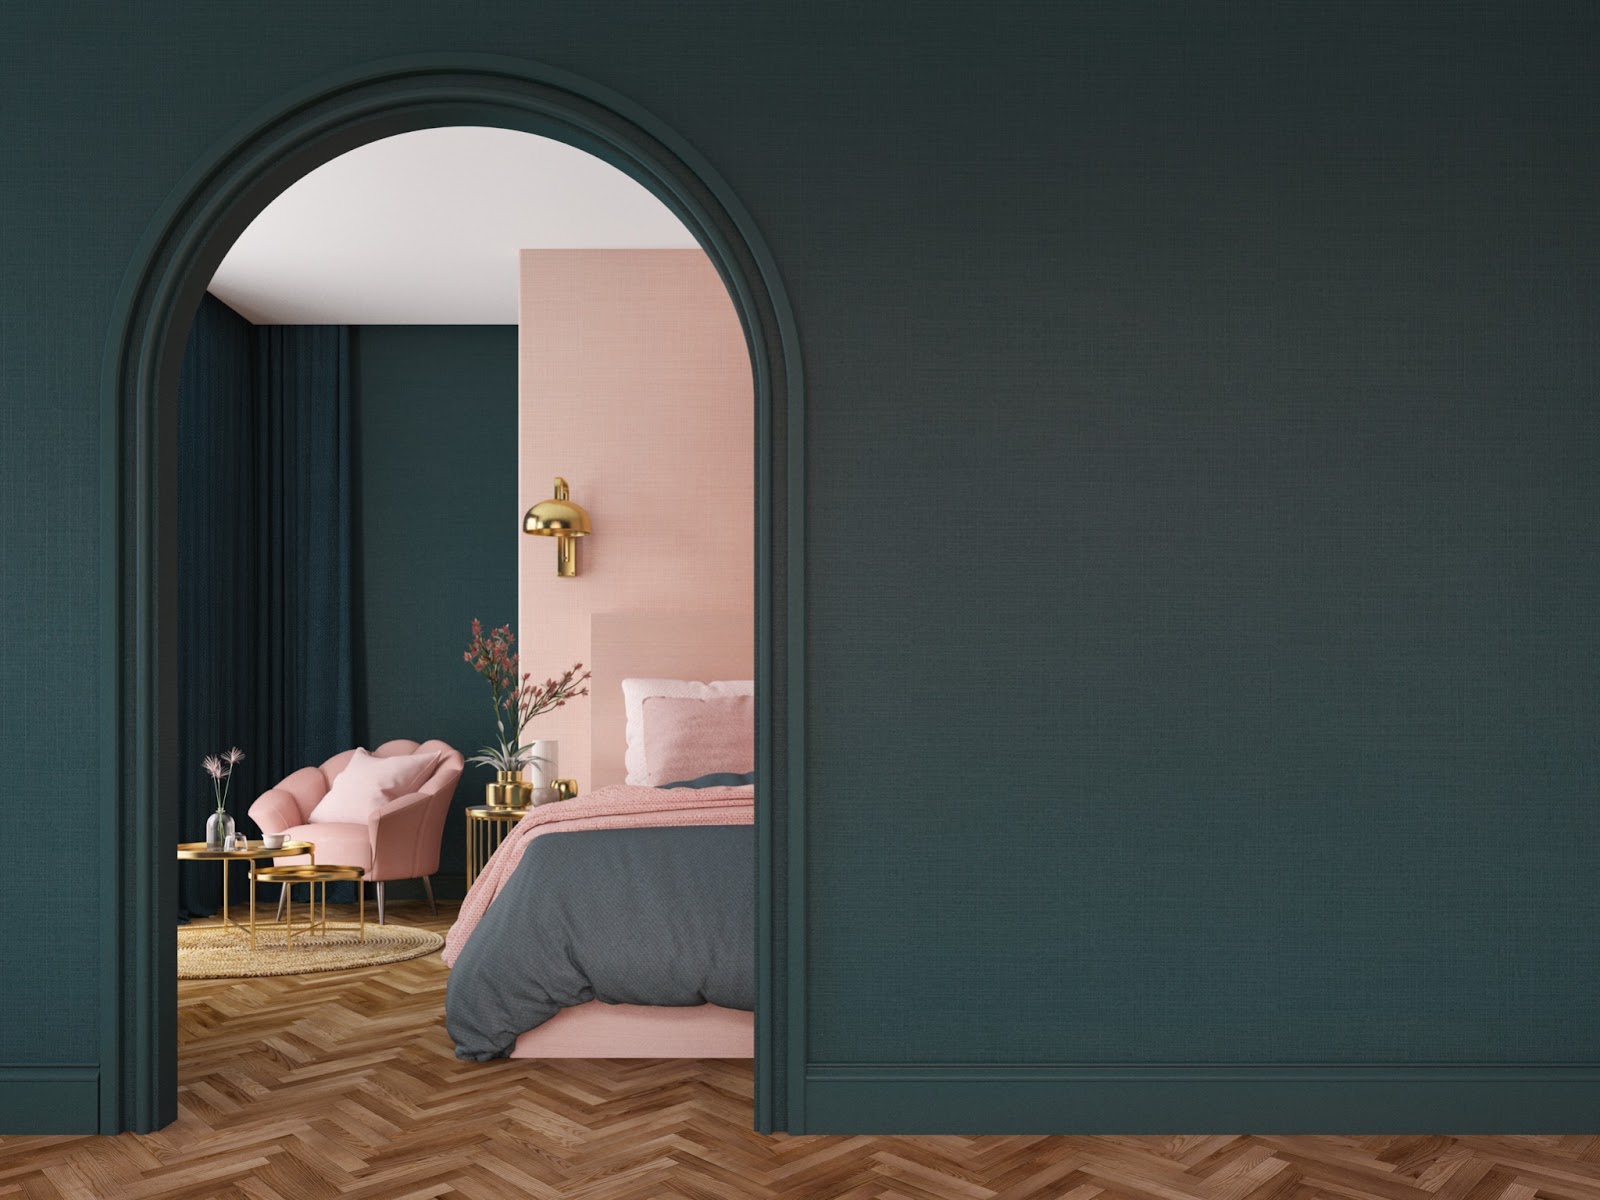 Art Deco arched bedroom entry featuring contrasting wall colors of deep green and pale pink. A scalloped chair in pink and layered bedding of pink and green.